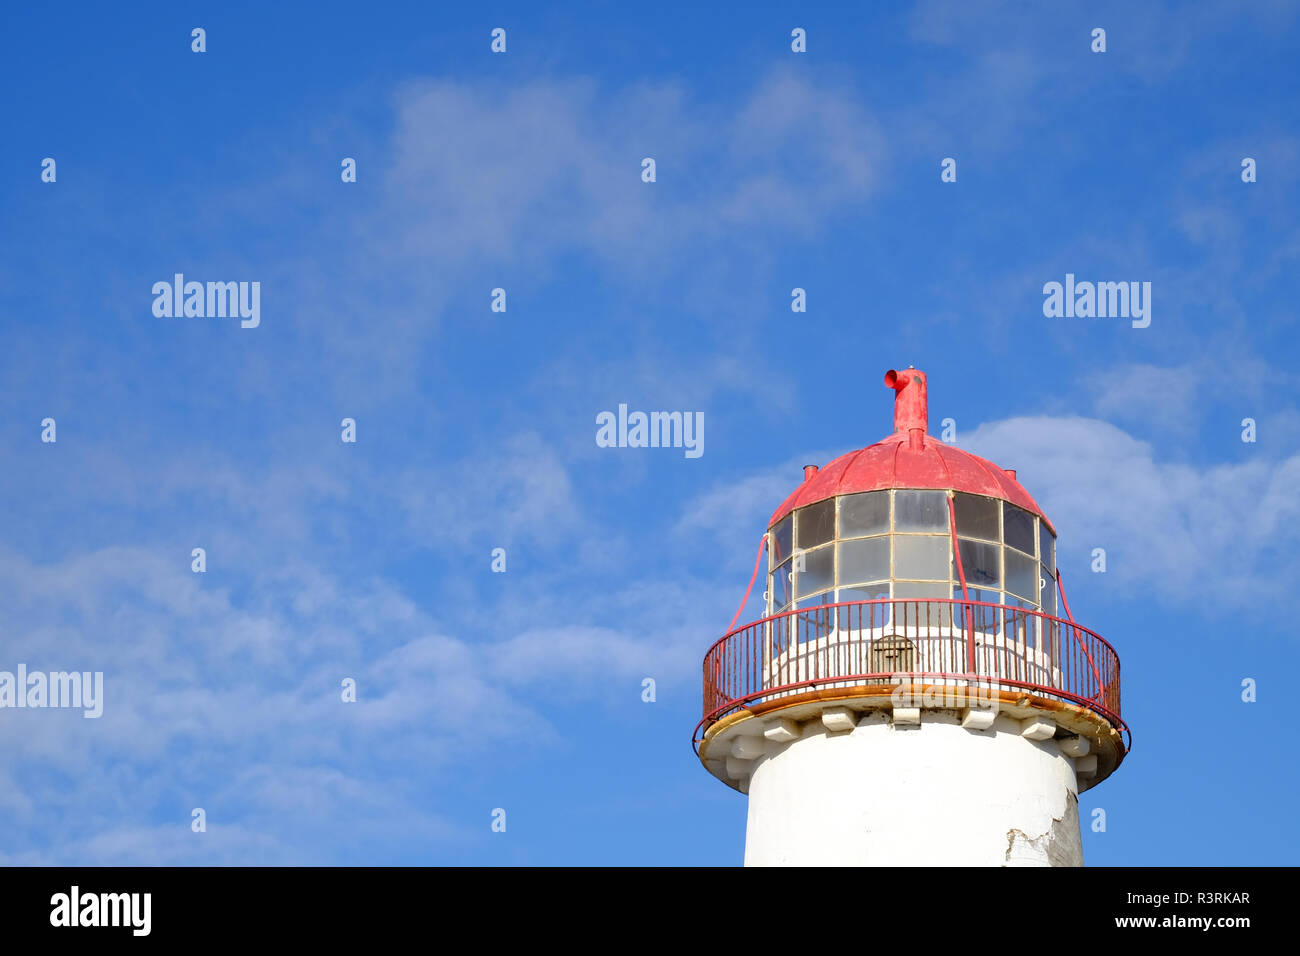 old lighthouse on Talacre beach at point of Ayr, Flintshire, North Wales Stock Photo